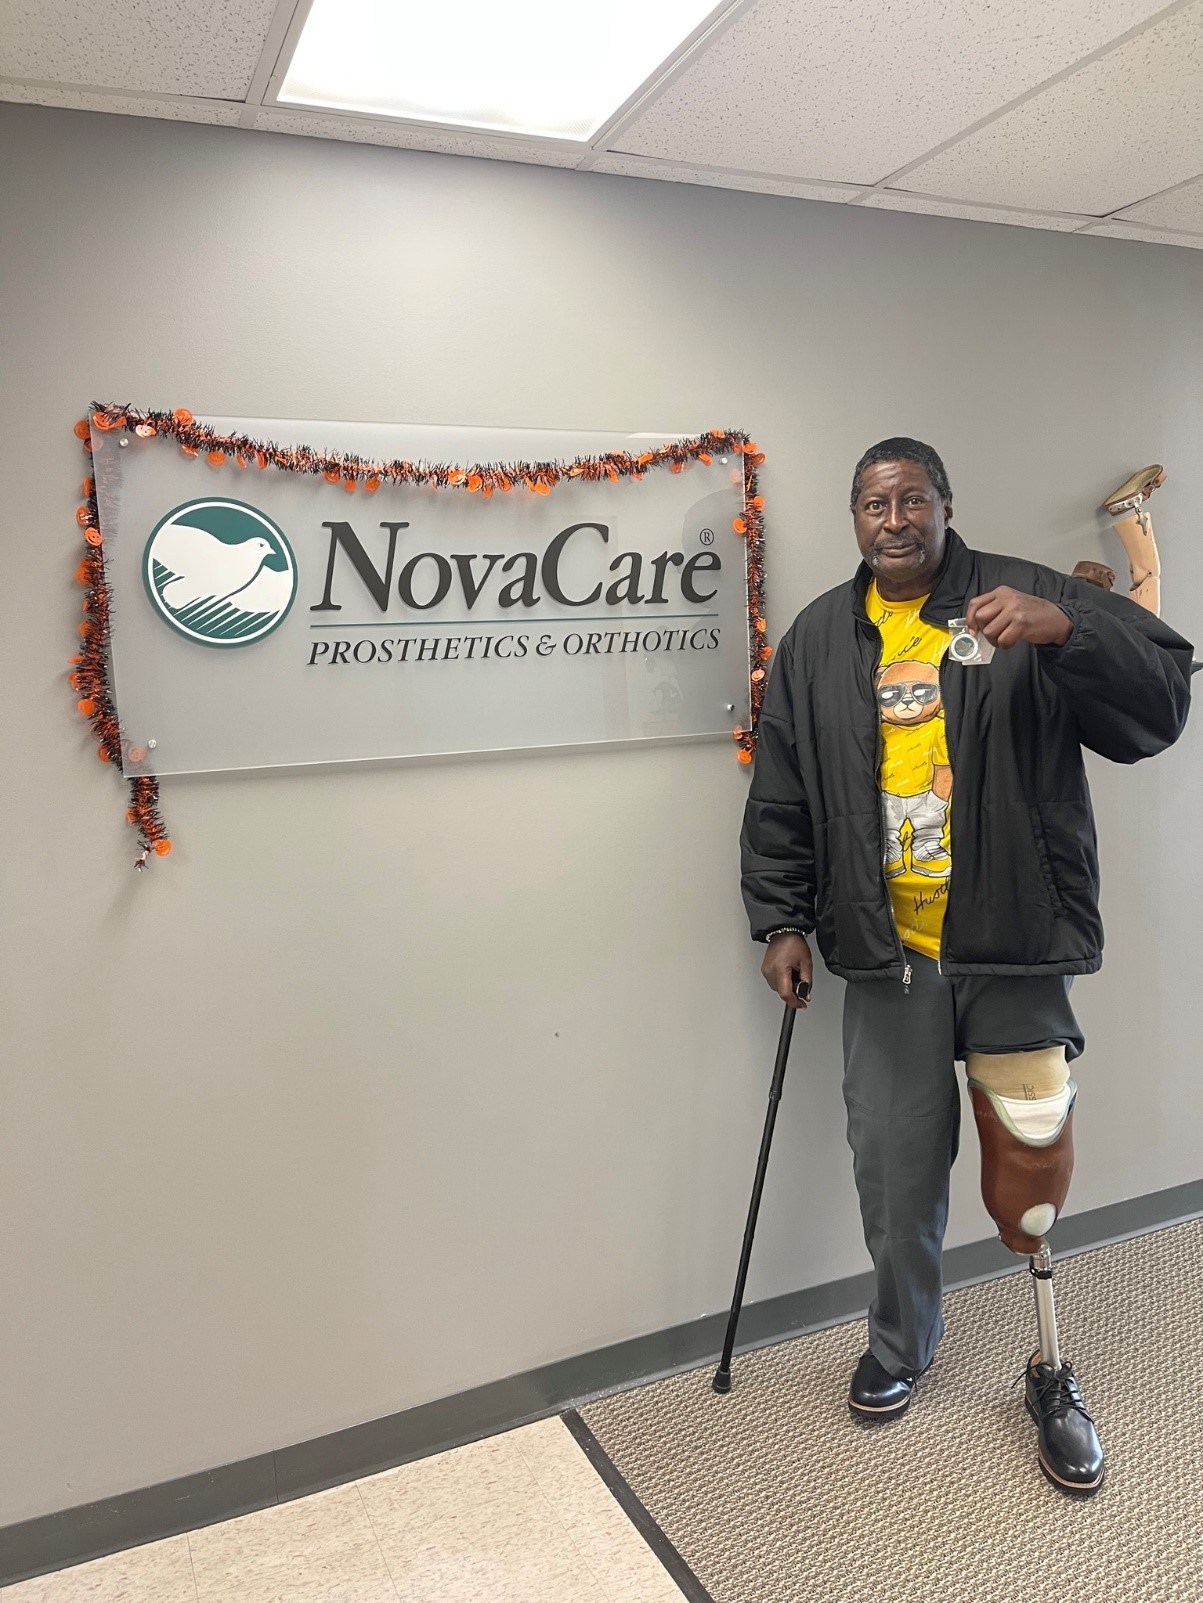 A patient named Robert posing in front of the NovaCare logo with his prosthetic.